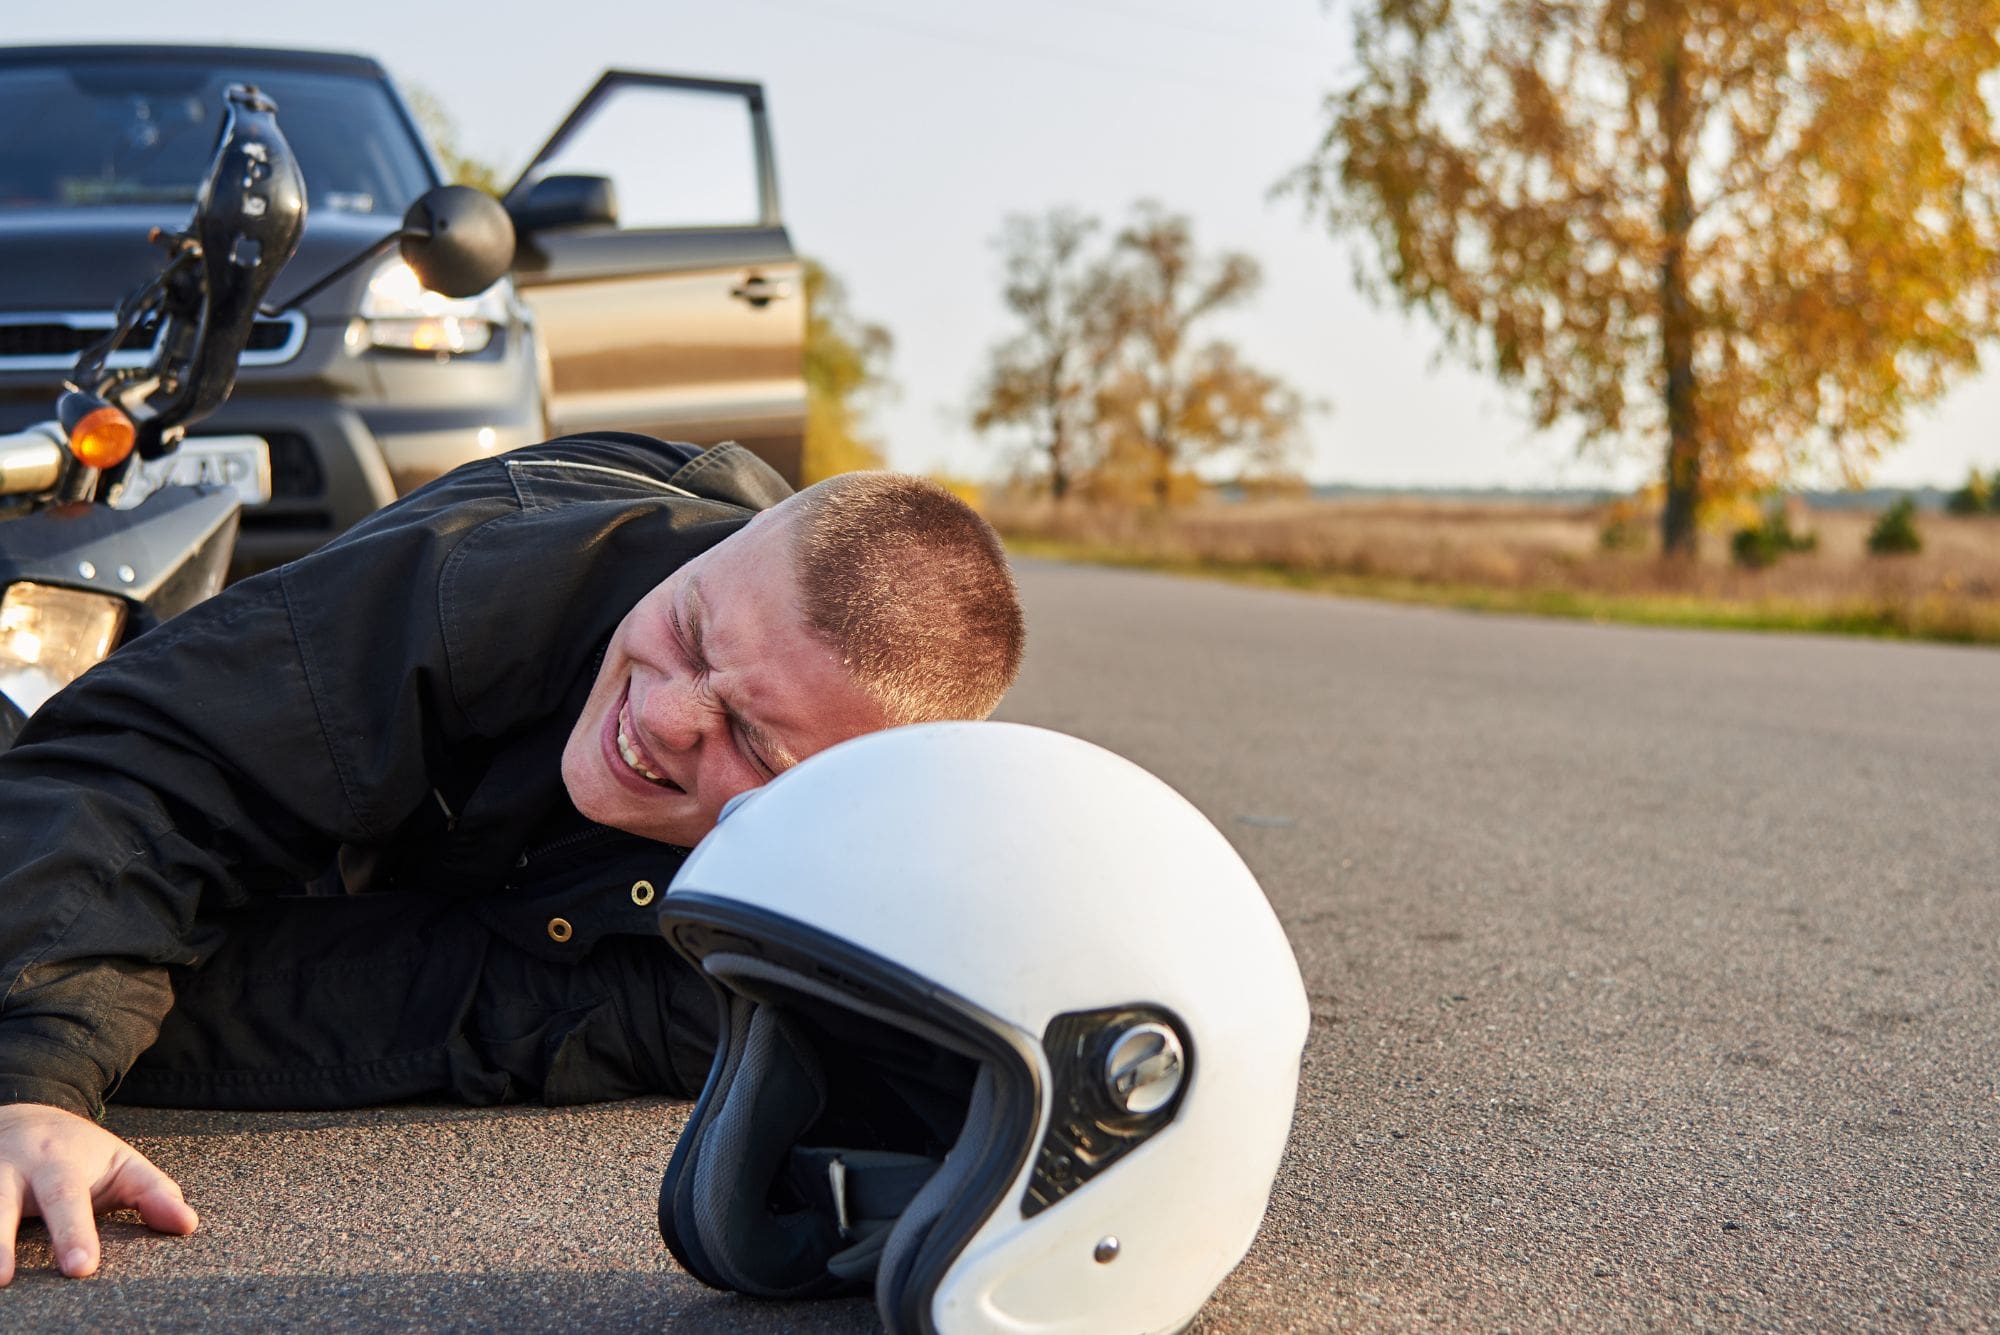 image of a man who fell off of a motorcycle